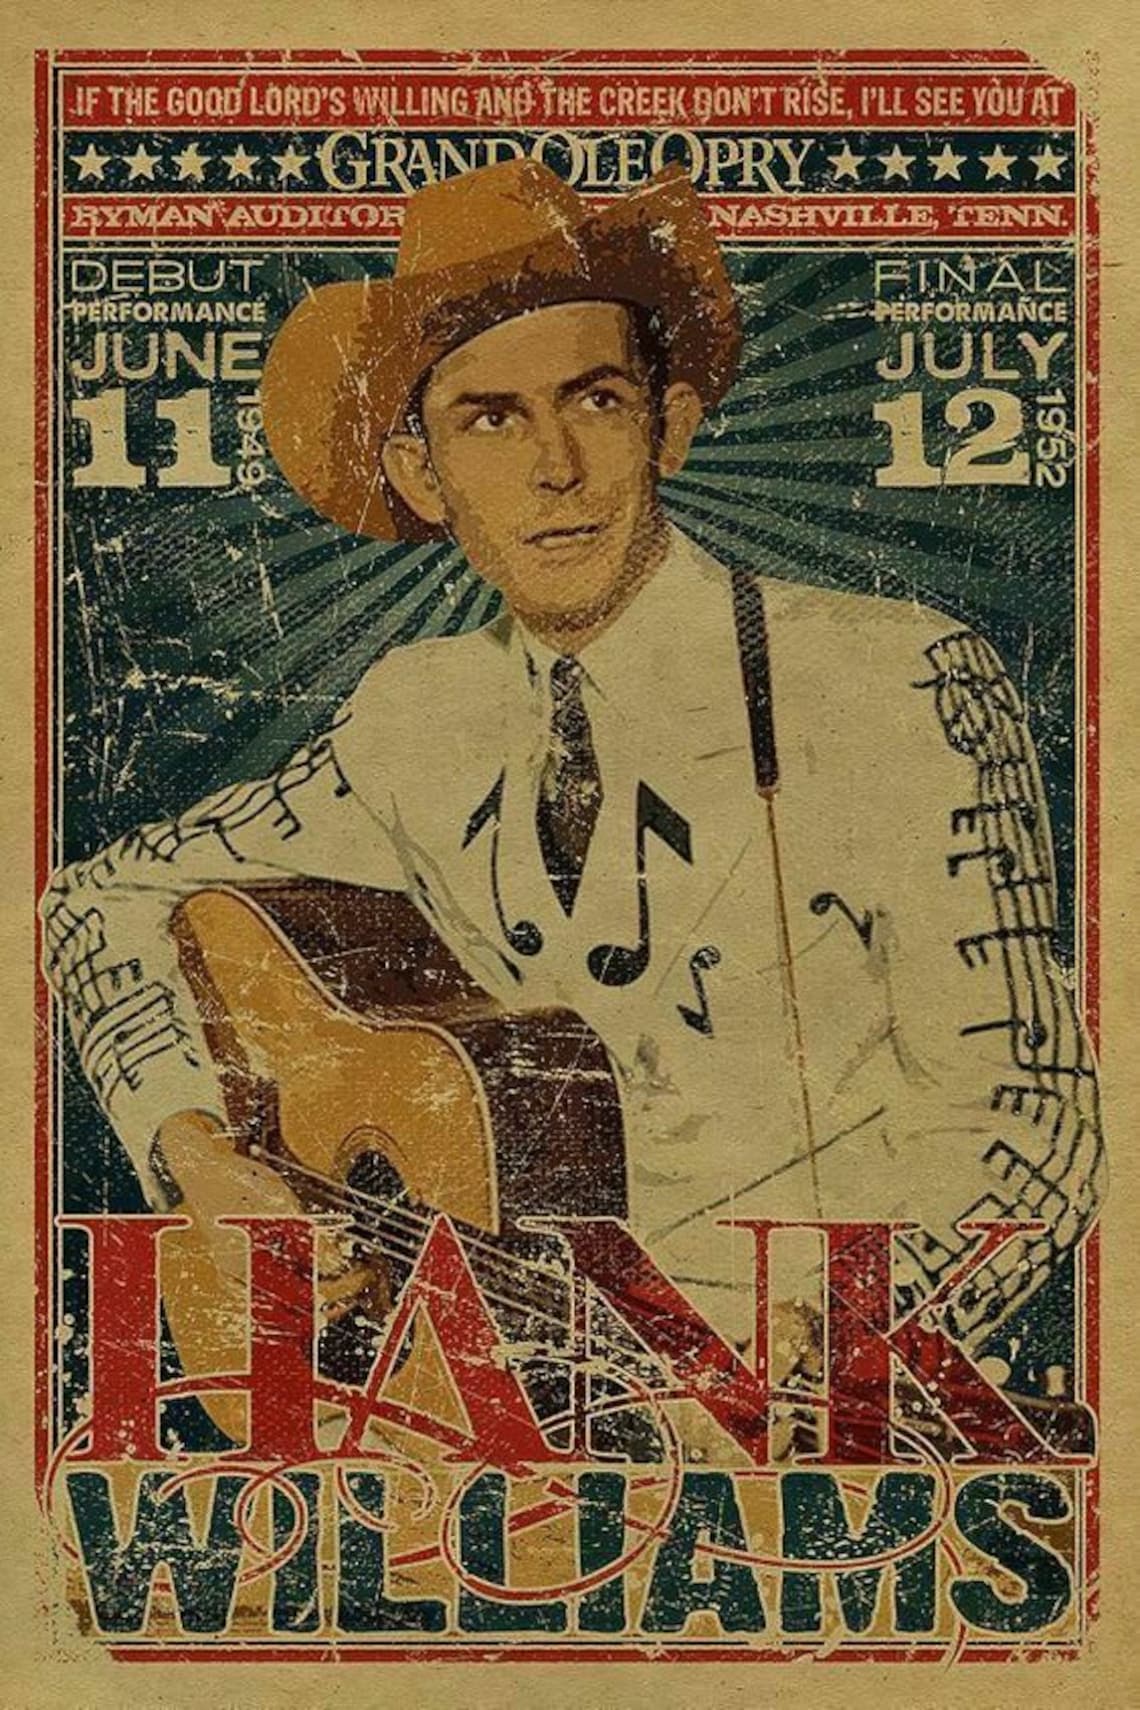 Hank Williams Grand Ole Opry Concert Metal Tin Sign Poster Etsy